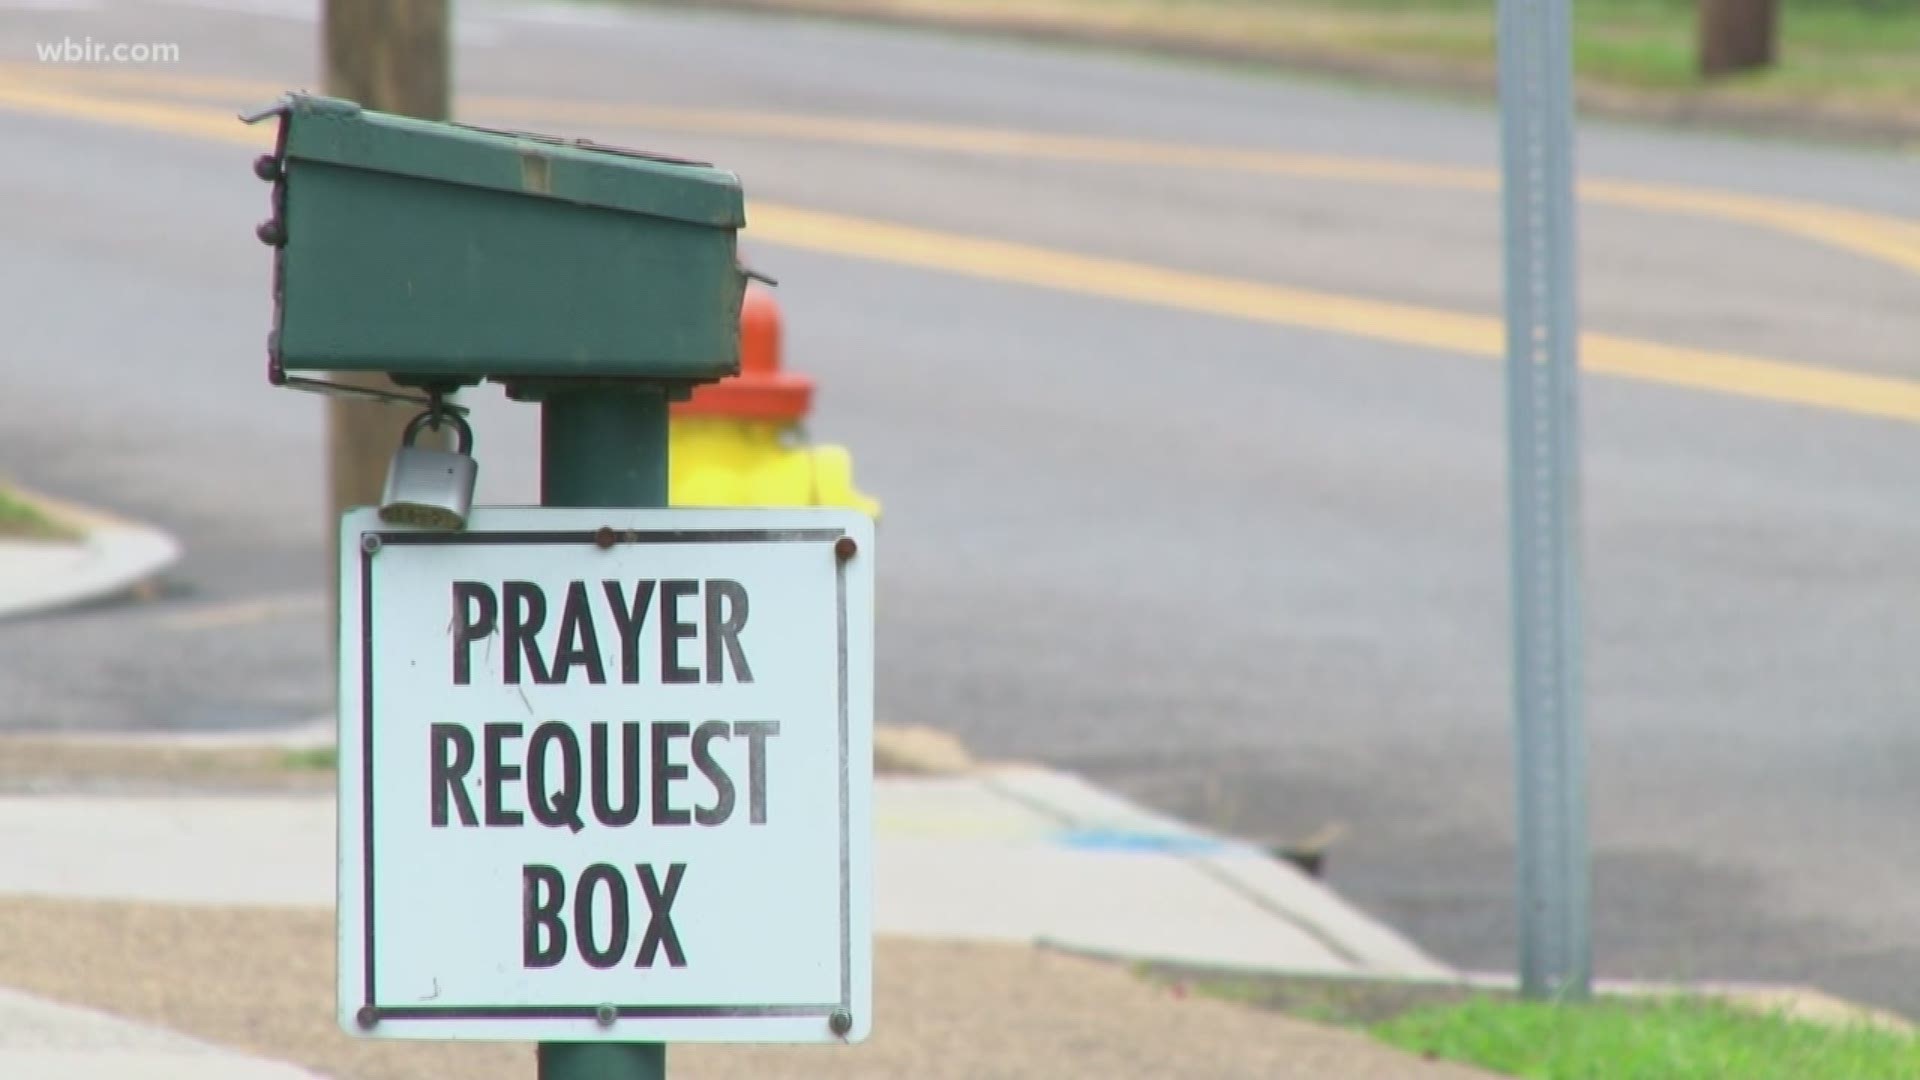 A local congregation is embracing the power of prayer outside its church walls.